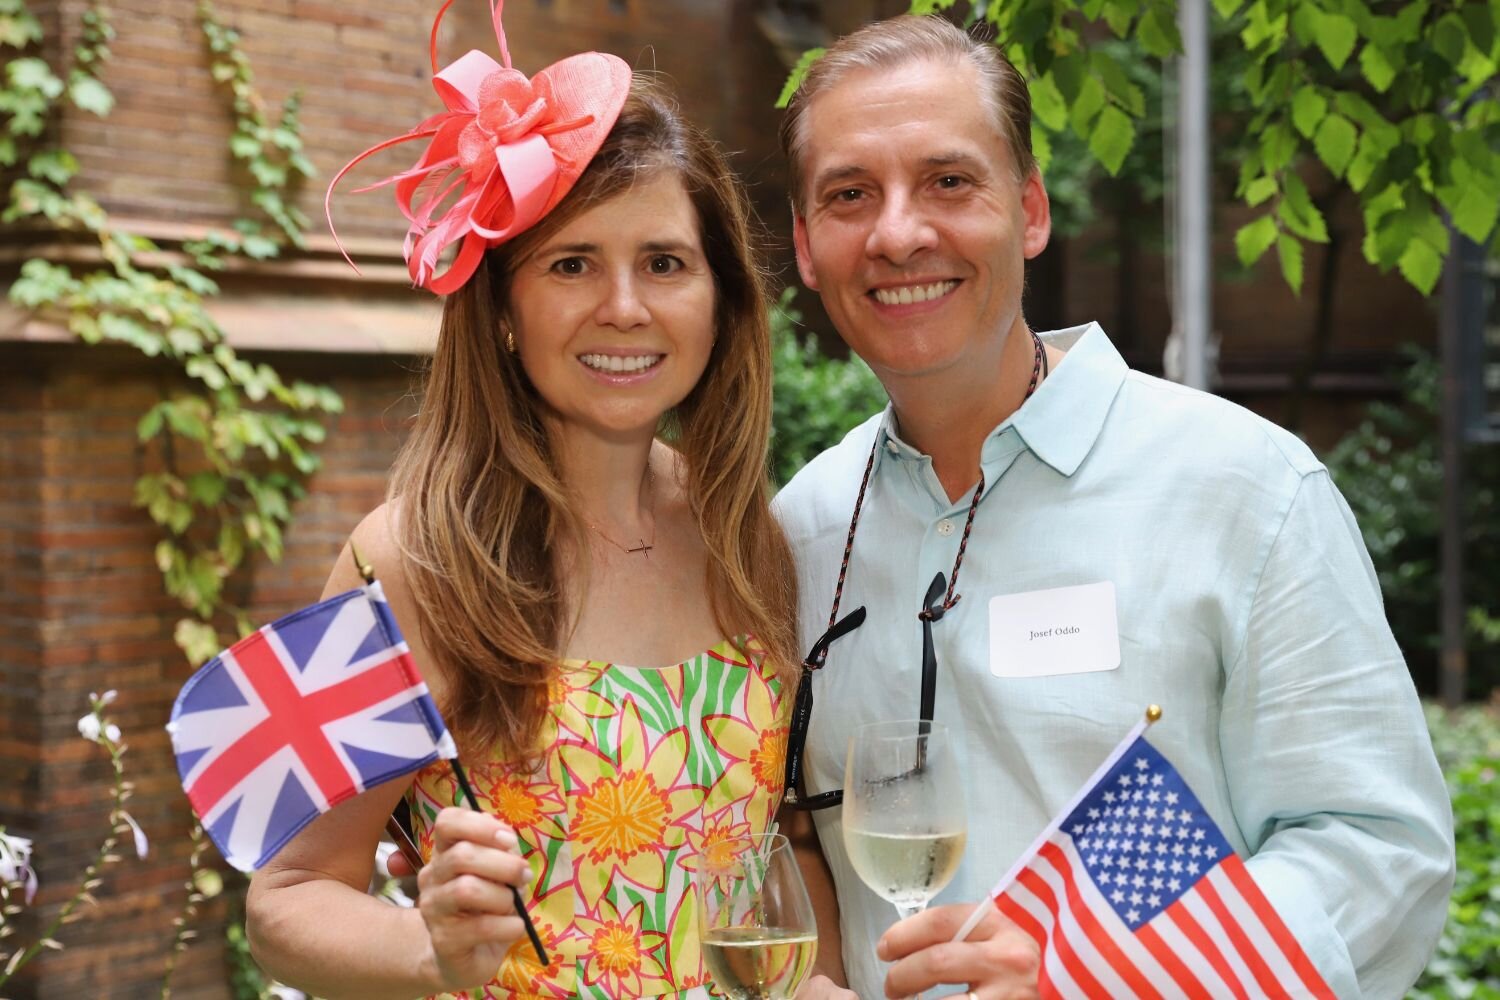  The Annual British-American Societies’ Summer Garden Party welcomed members and friends from across the tri-state area.  